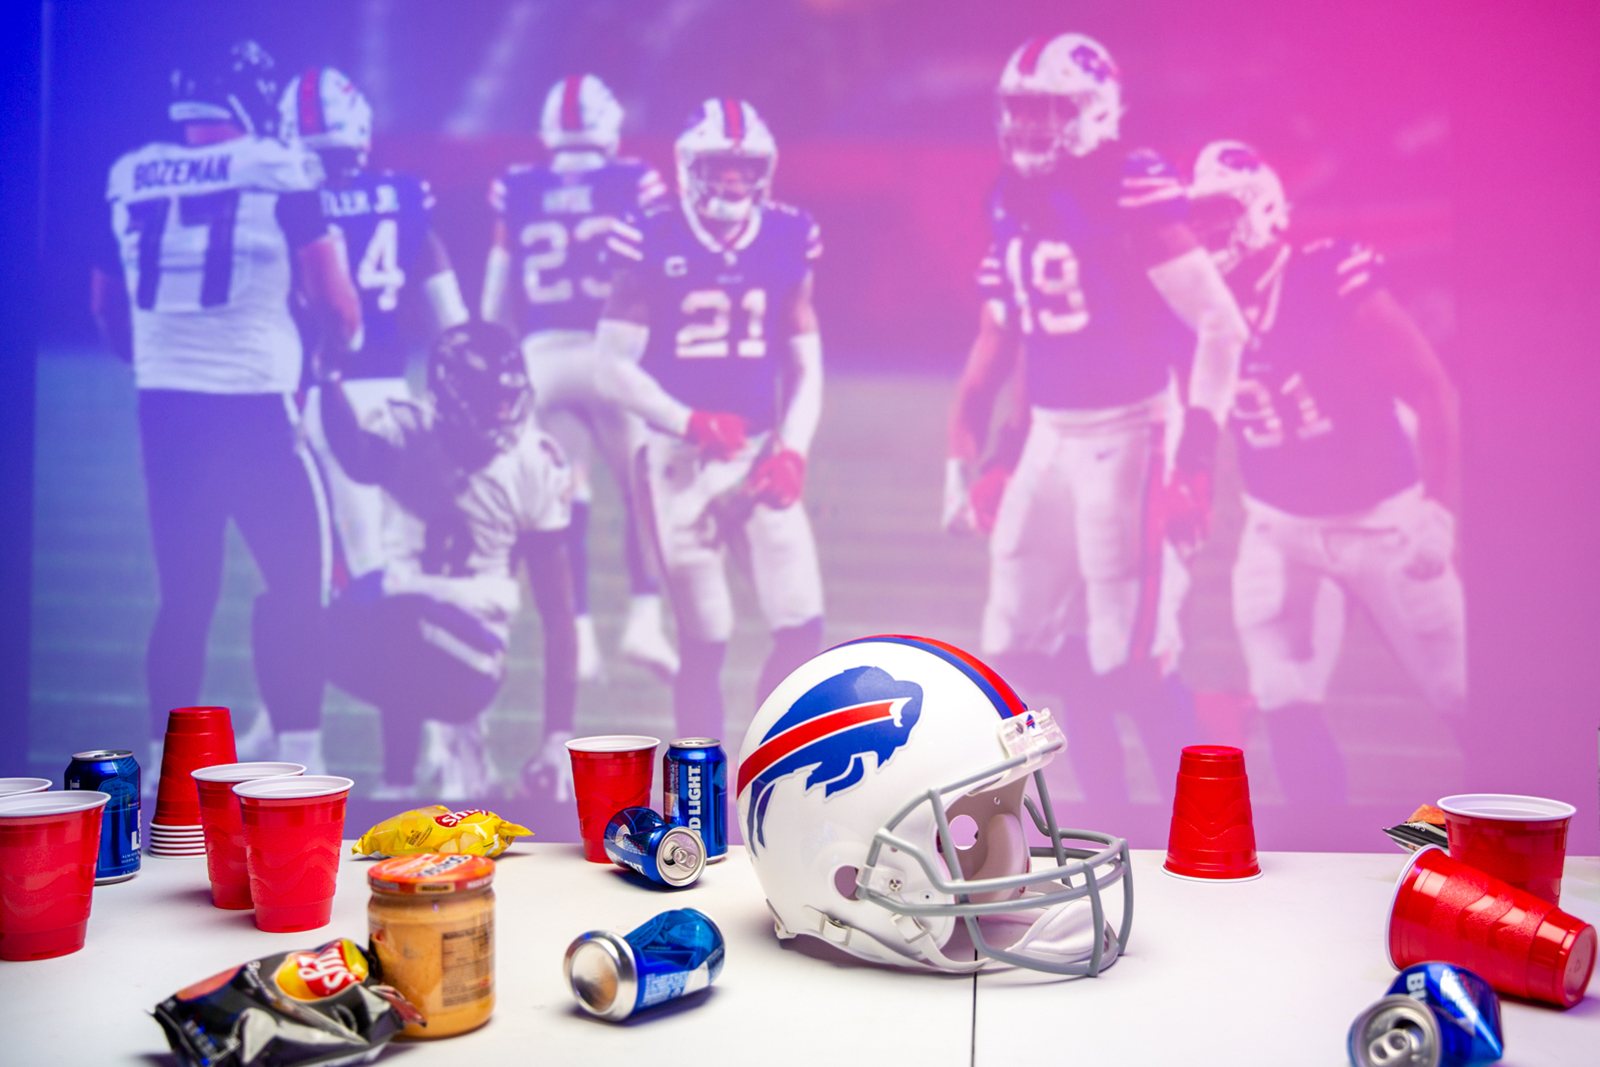 A Buffalo Bills helmet on a table in front of images of football players